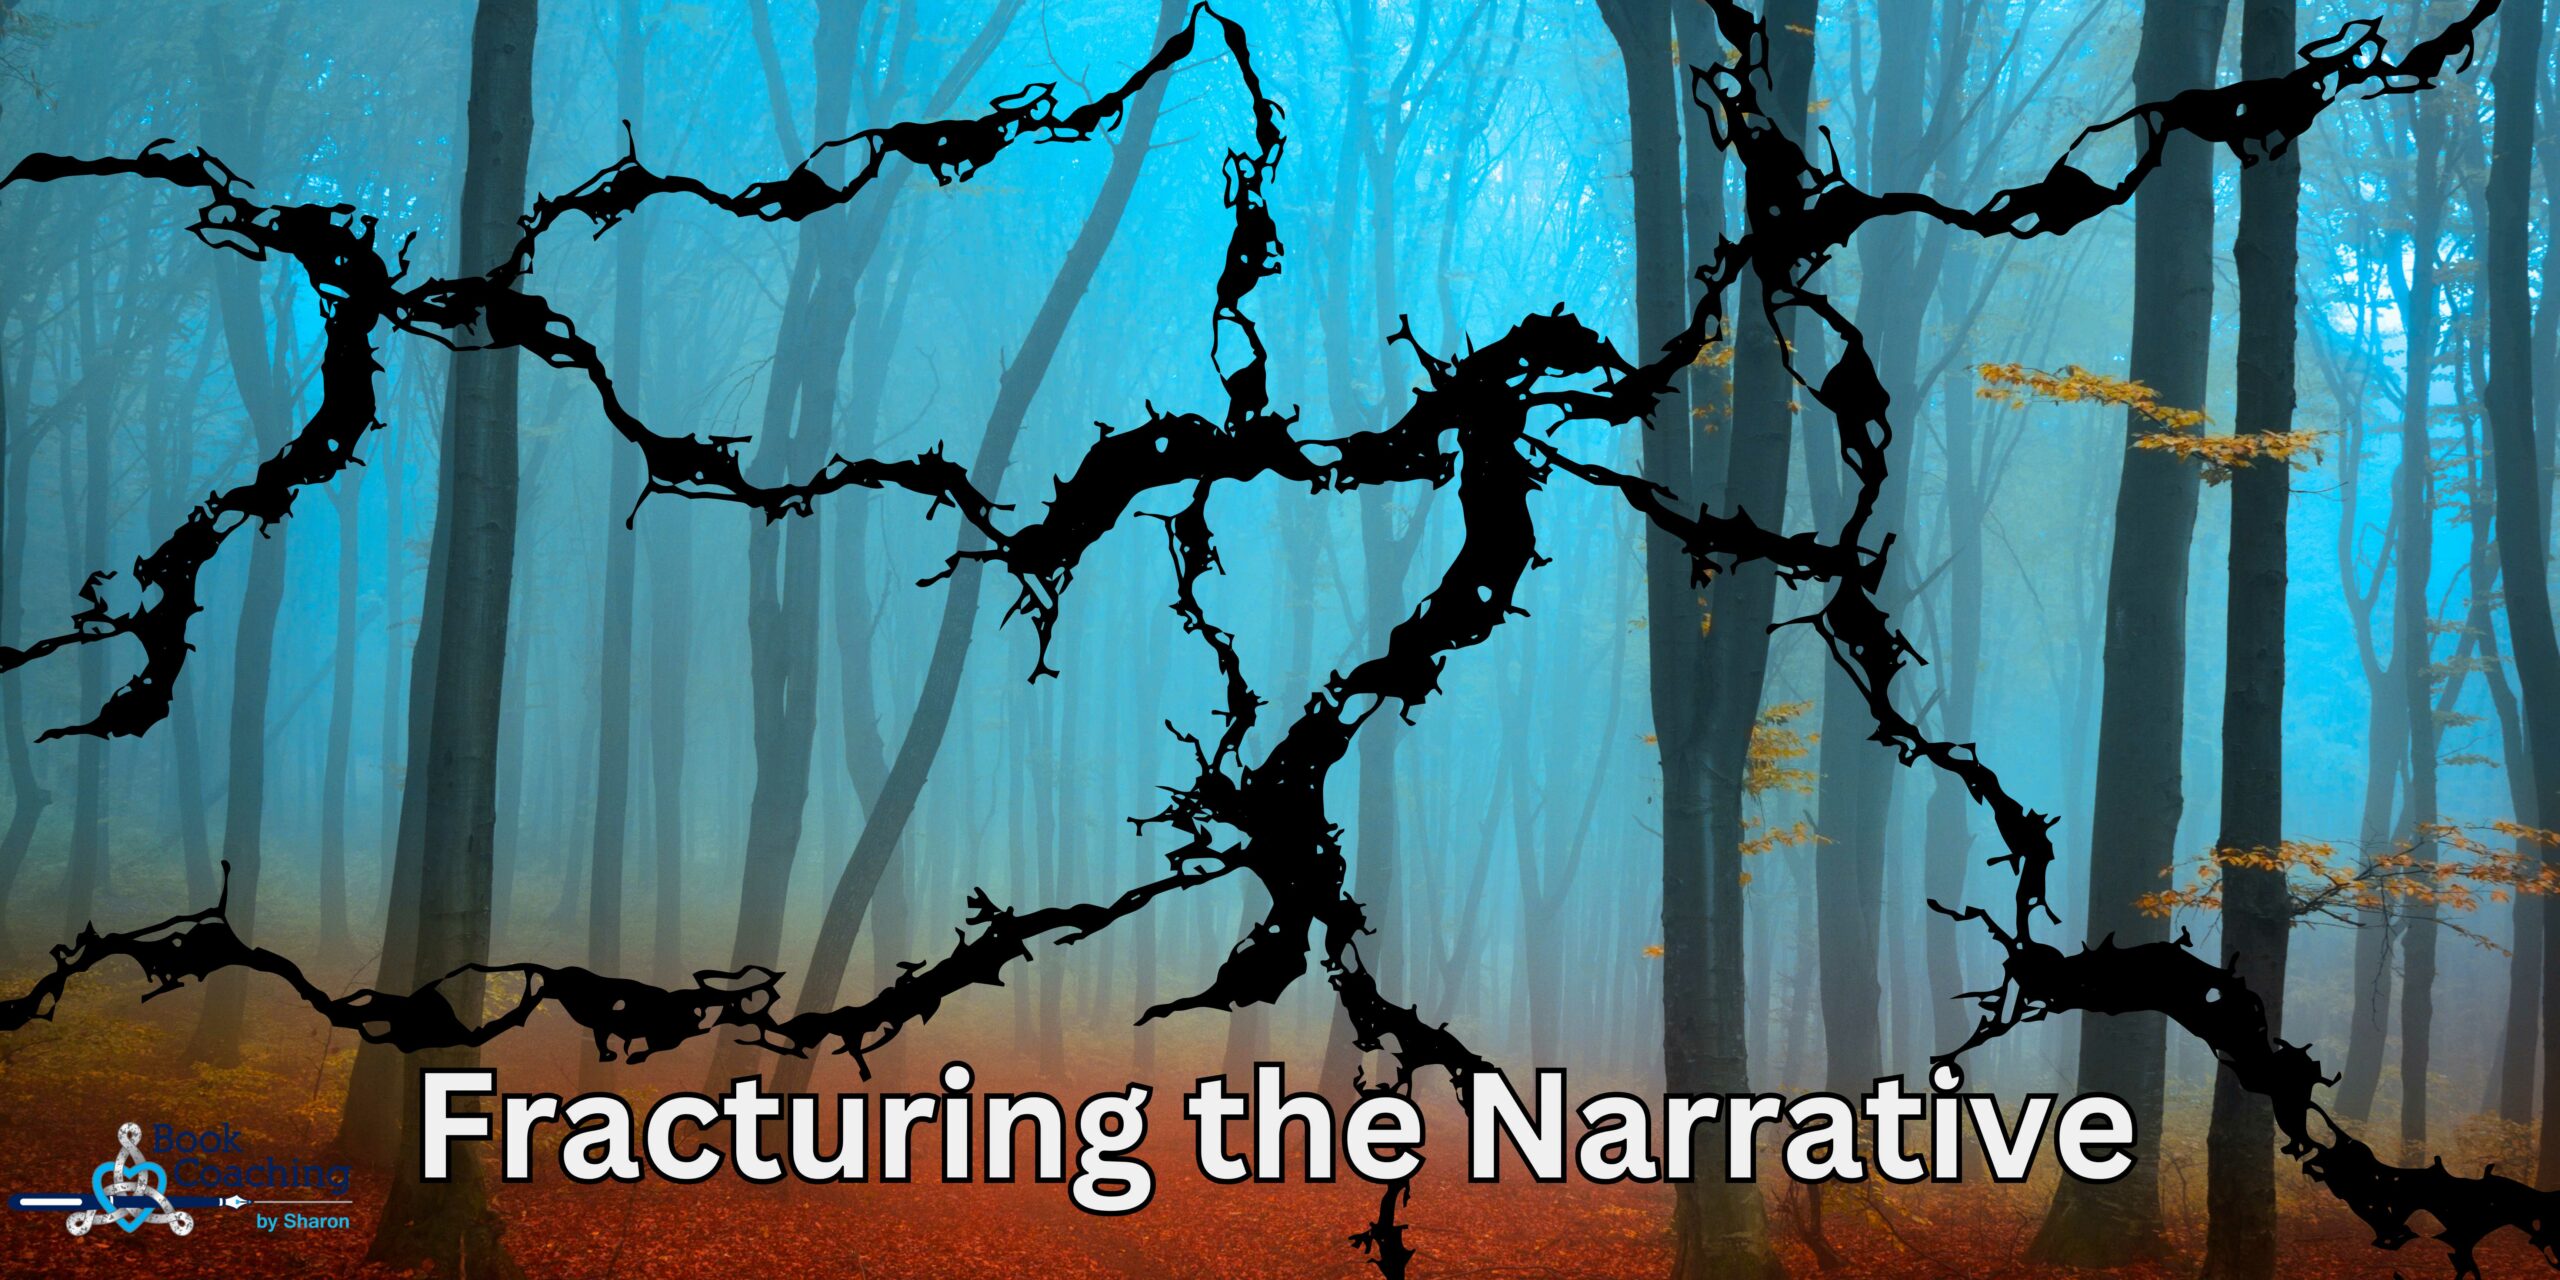 Image of a shadowy landscape with black fracture lines running through it with the book coaching by Sharon logo in the lower eft-hand corner and text that read "Fracturing the Narrative"